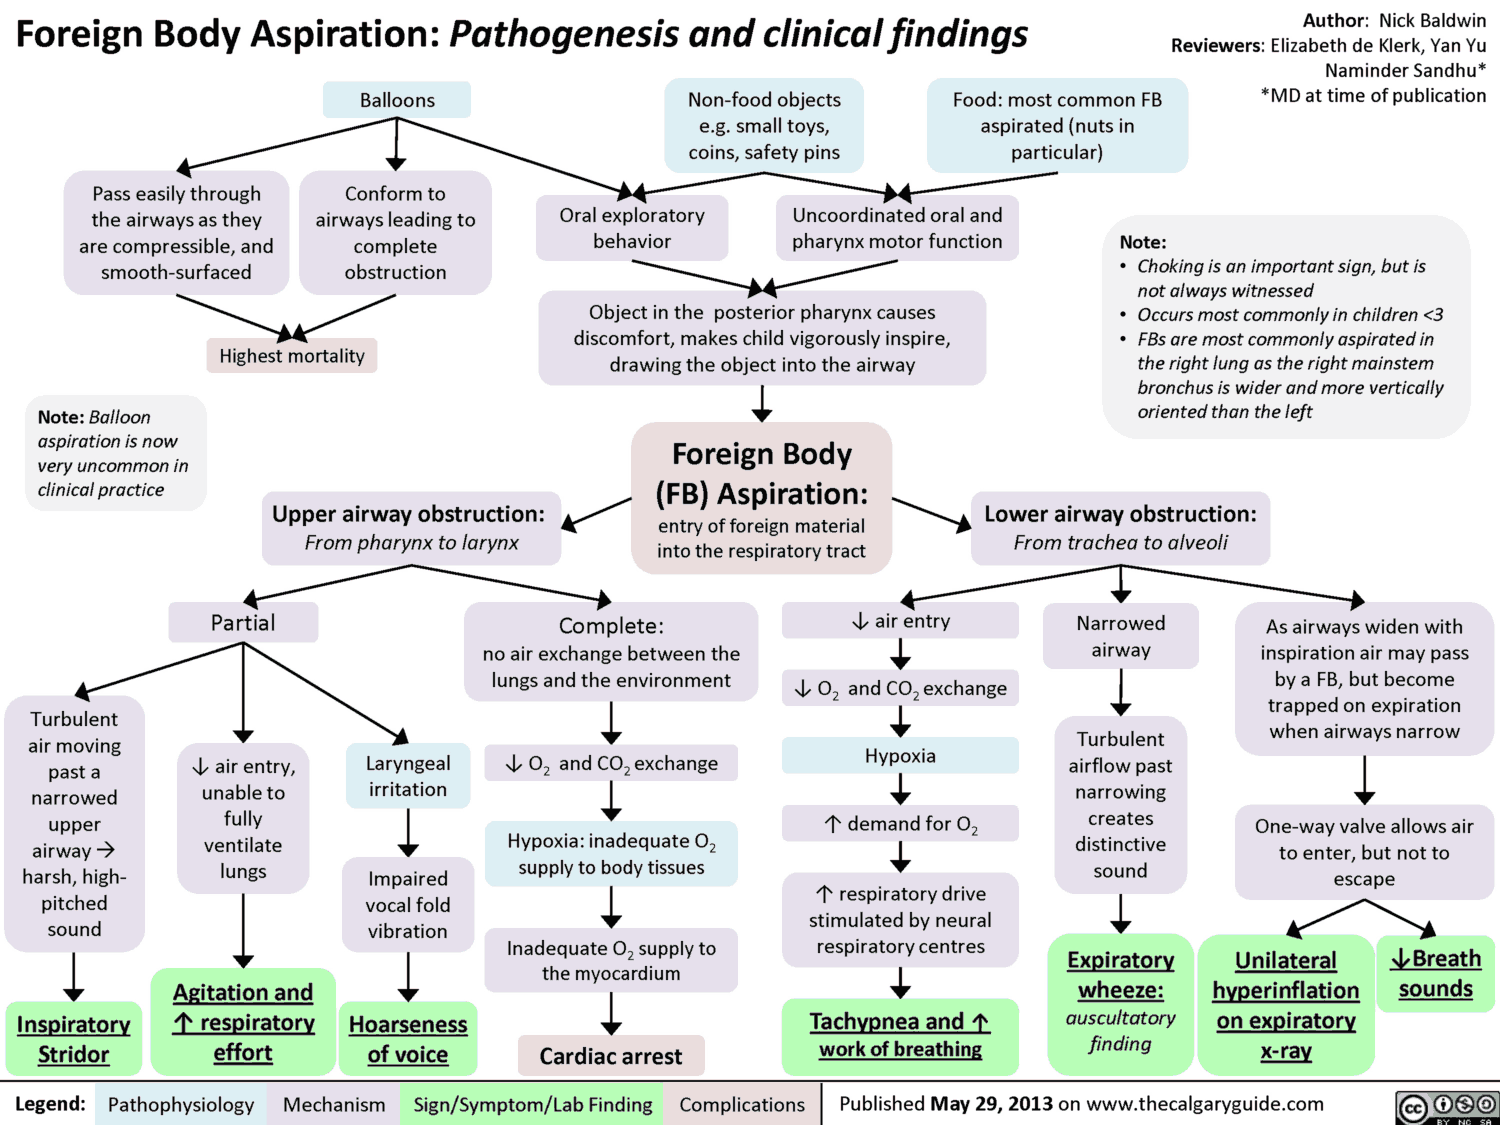 Foreign Body Aspiration - Pathogenesis and Clinical Findings